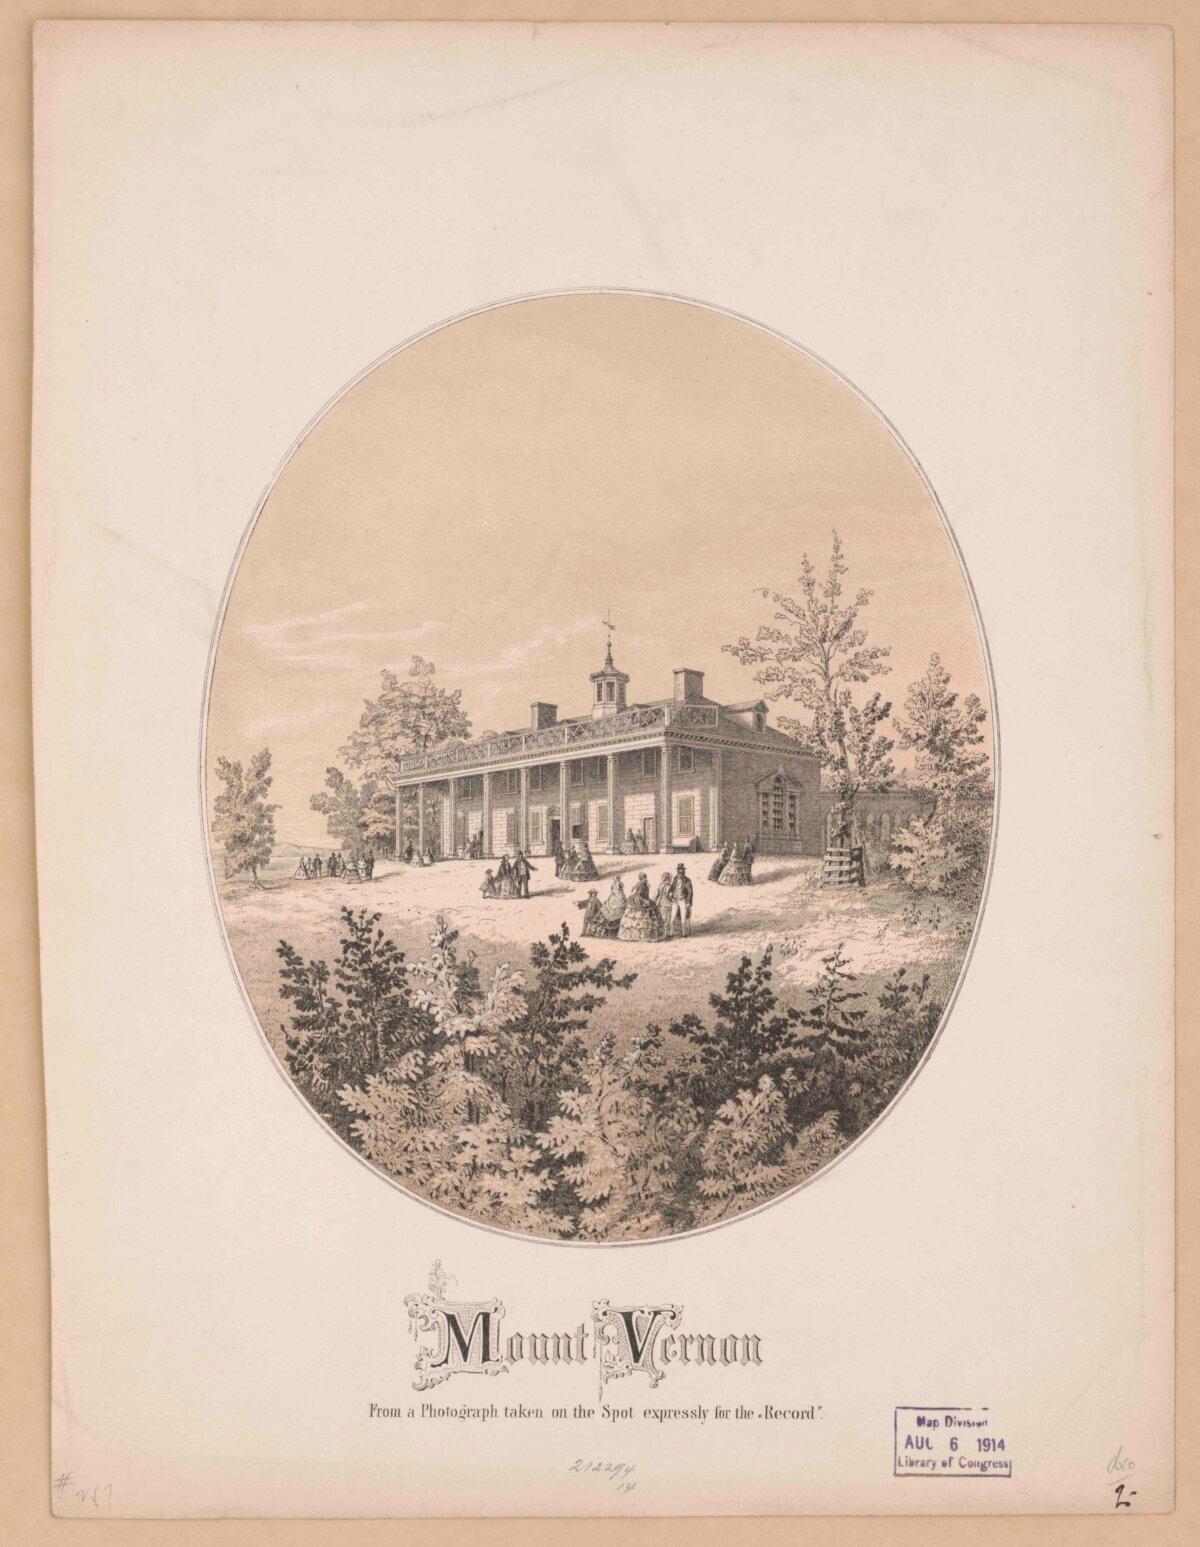 An engraving of Mount Vernon from a photograph, between 1880 and 1913. Library of Congress. (Public Domain)